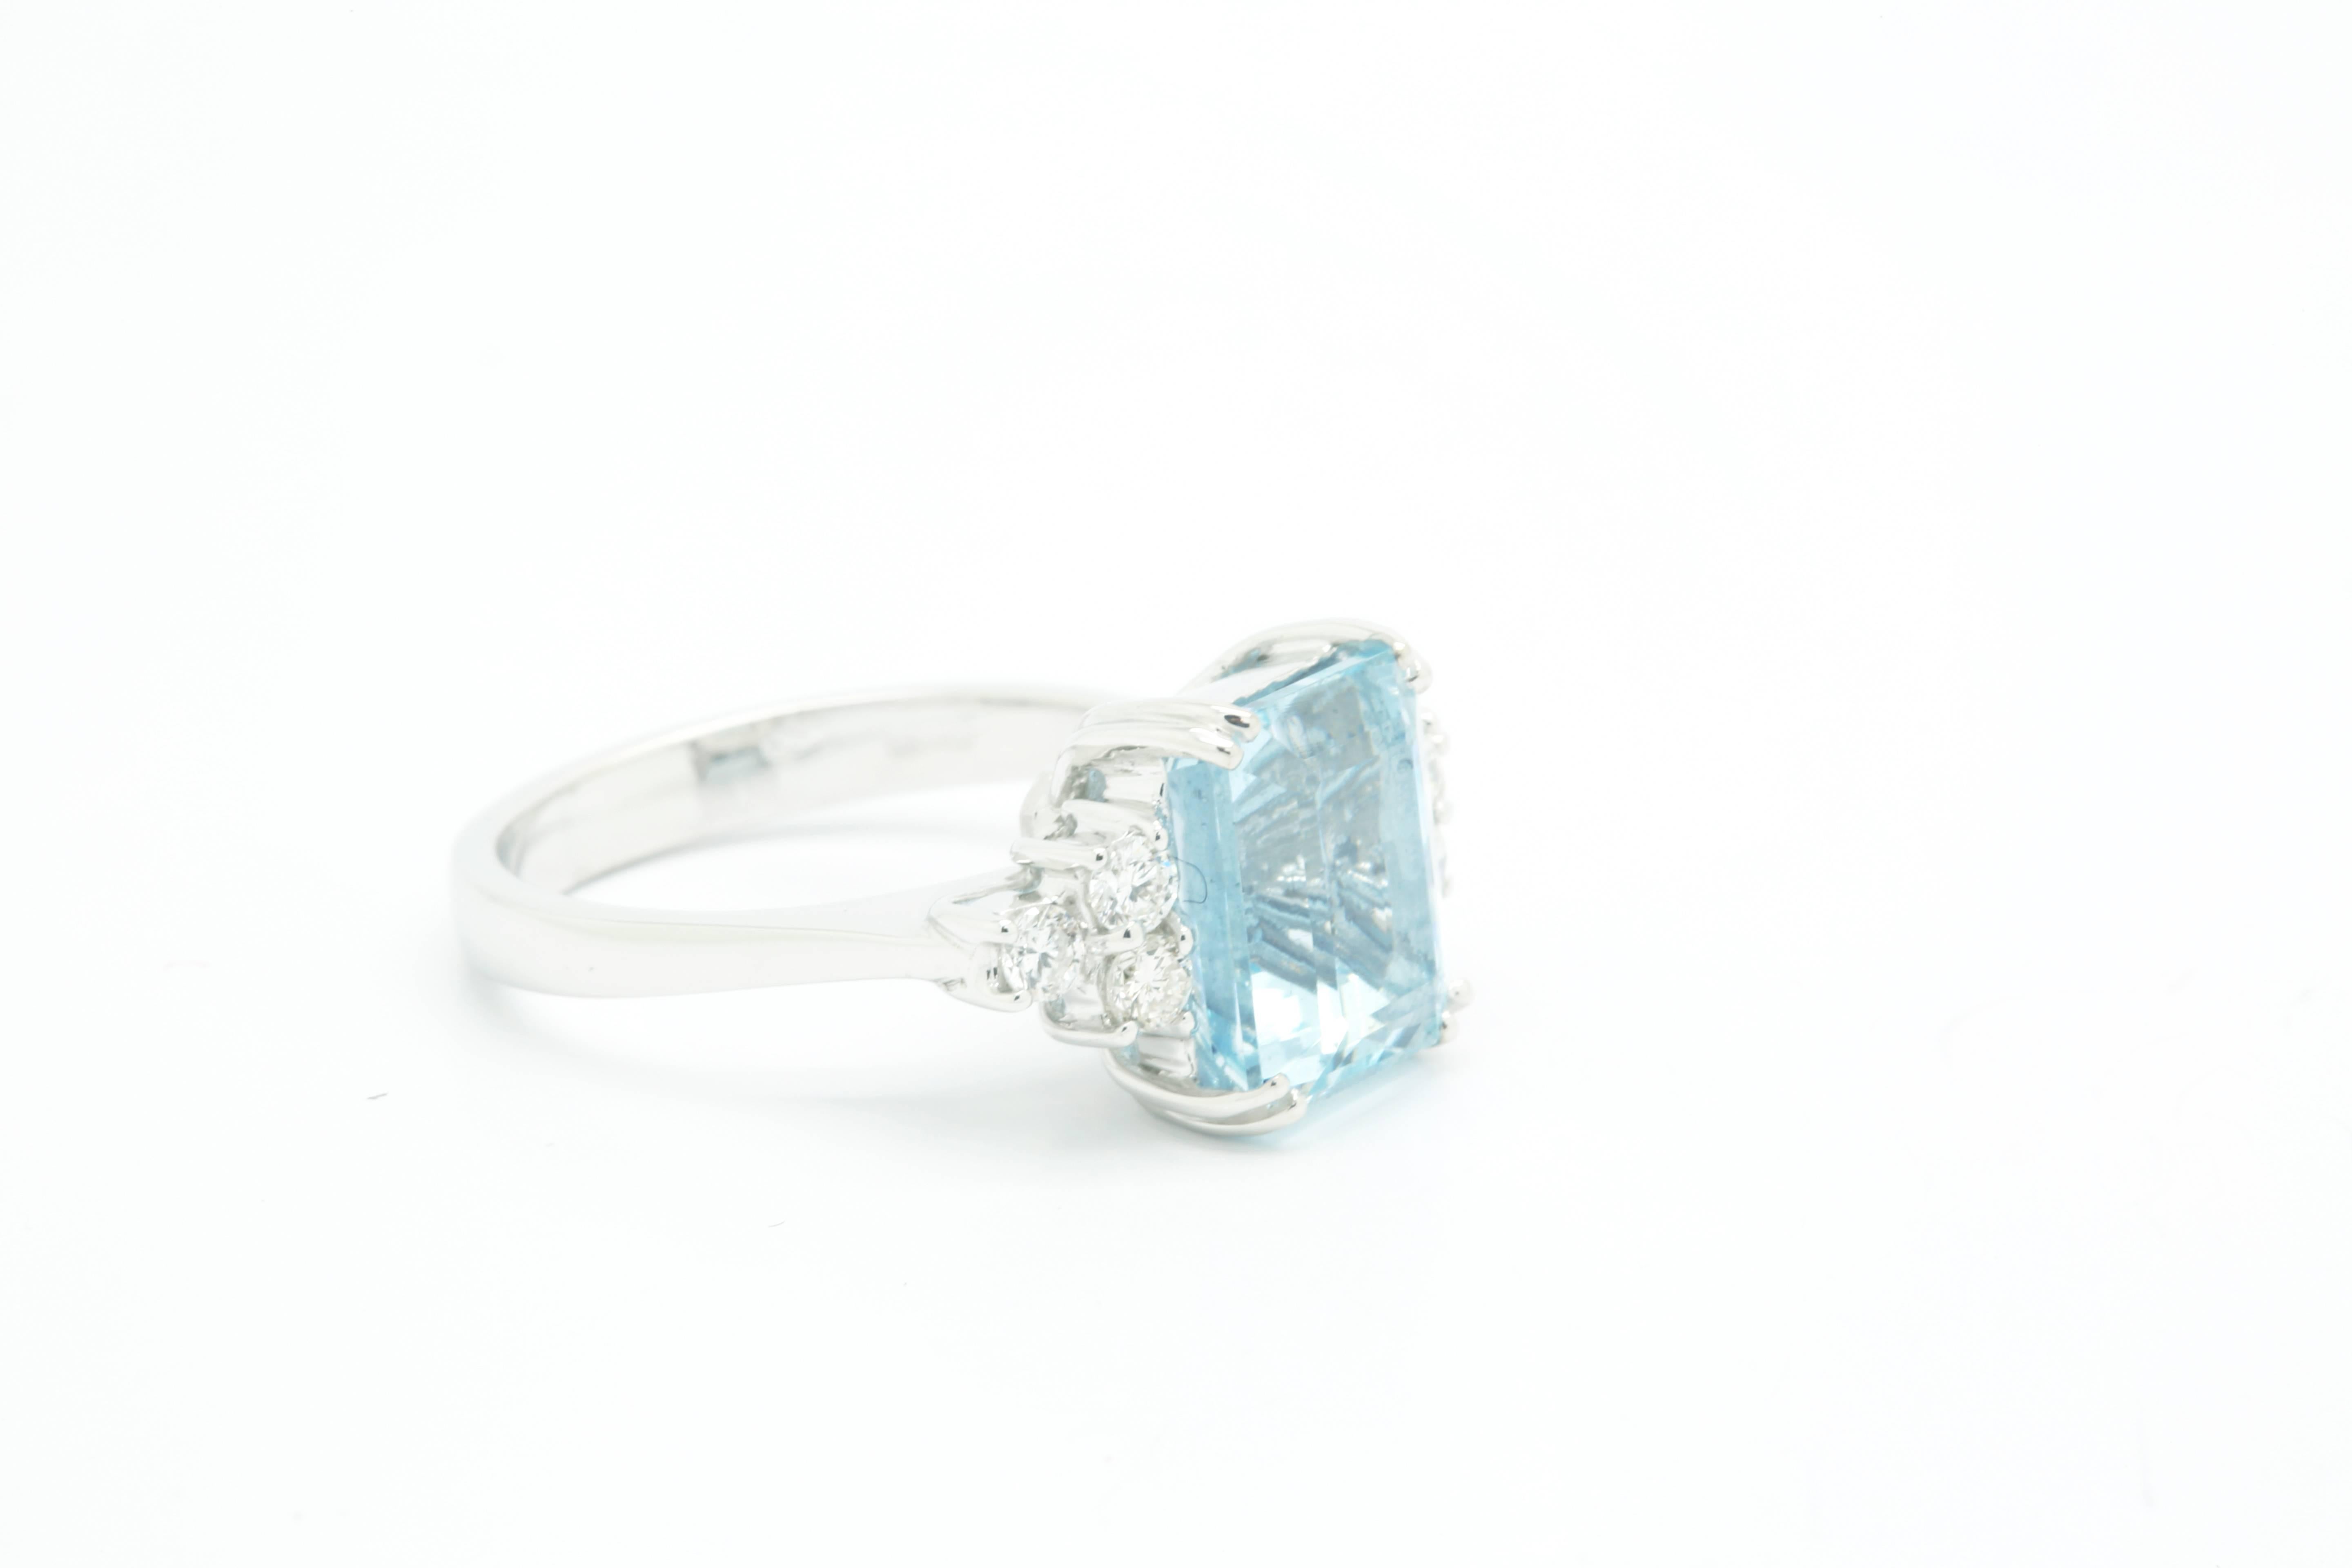 From the collection "Pure Aqua" by FERRUCCI & CO., a pure stunning emerald cut Aquamarine center stone loved by white Diamond accents, Made in Italy

Entirely made in 18k white gold

Diamond total carat weight of 0.27